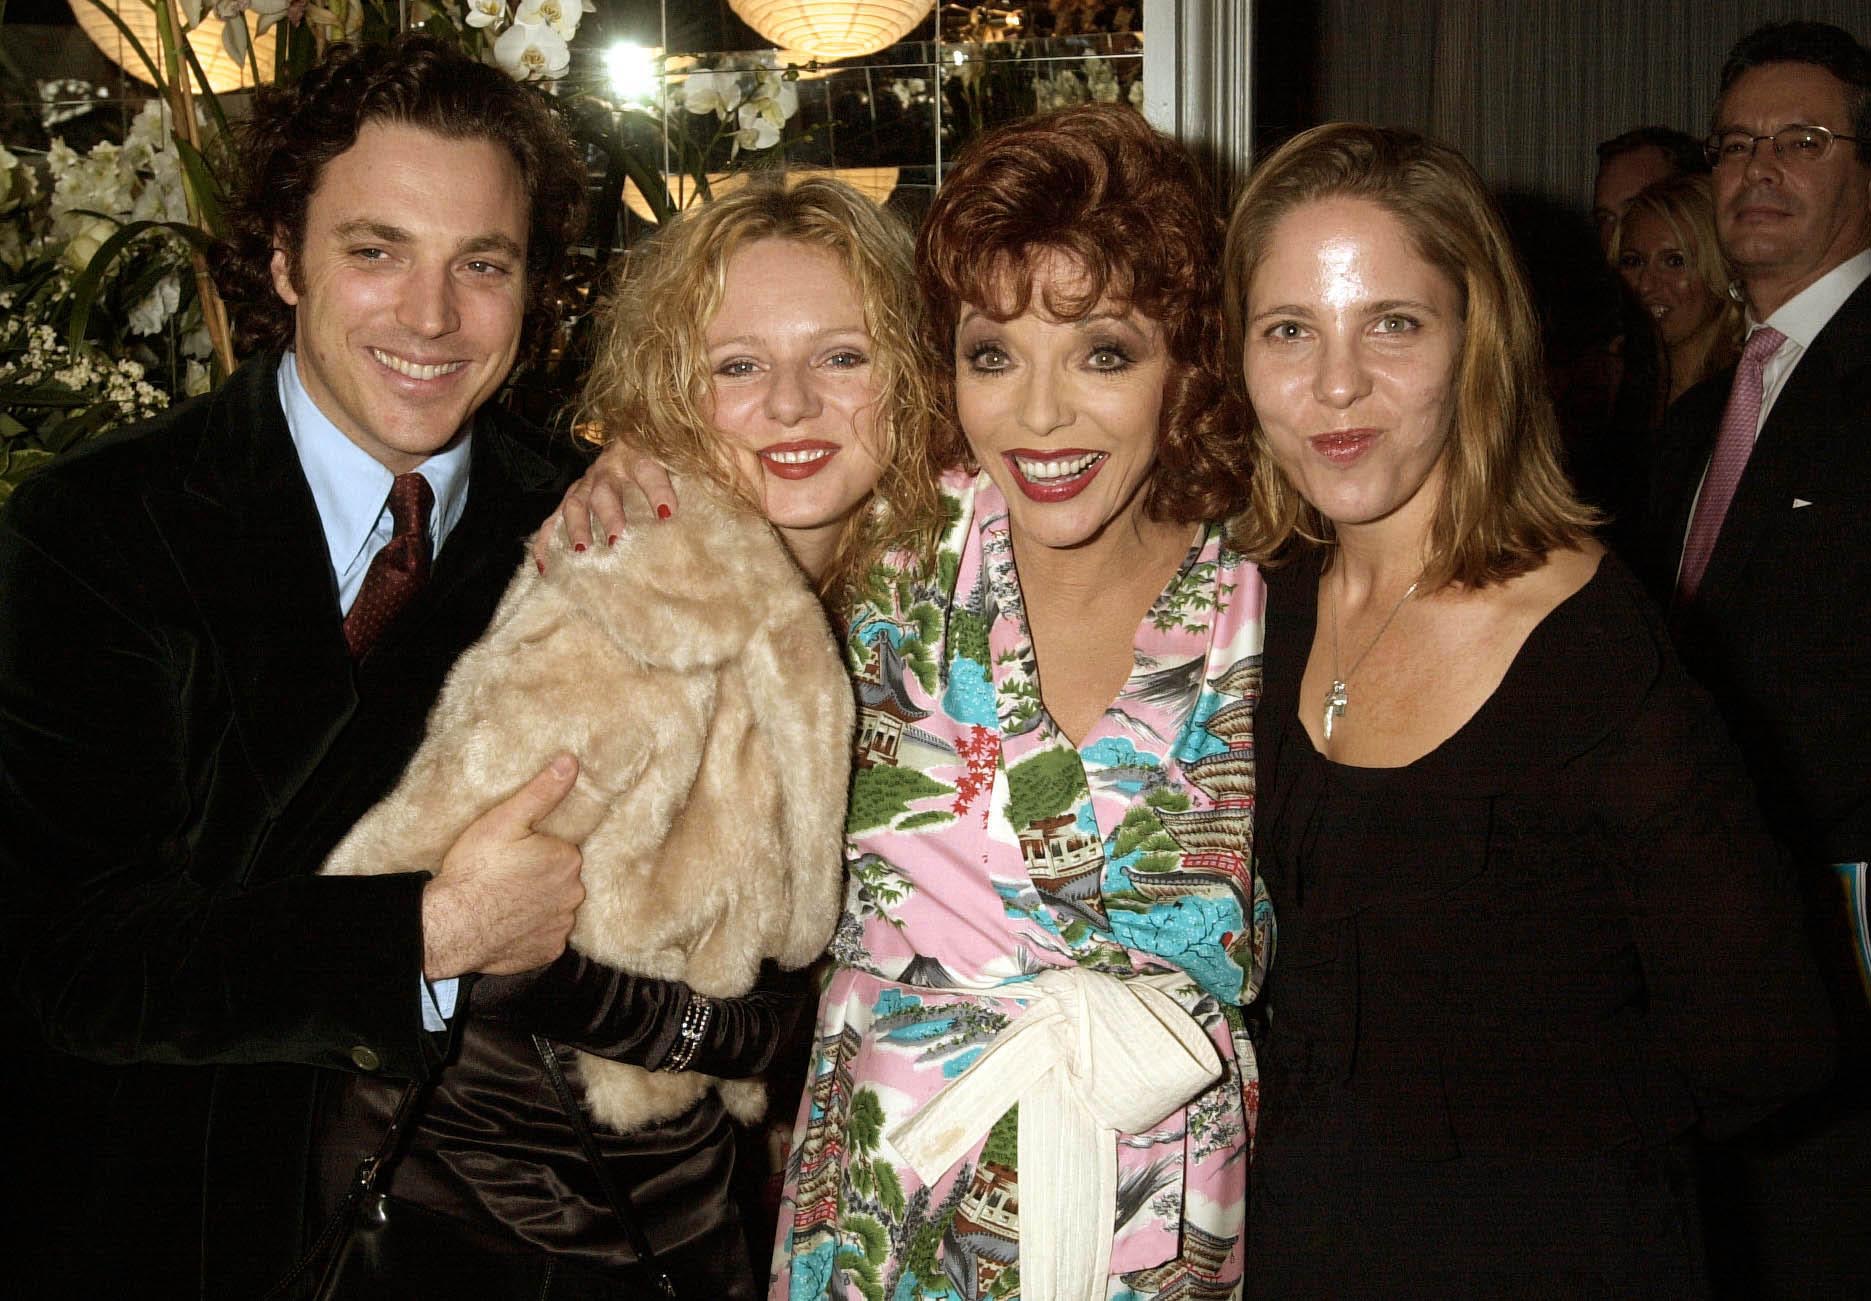 Joan Collins and her children Alexander (Sacha) Newley, Tara Newley and Katyana Kass attending the first night of "Over The Moon" at The Waldorf Hotel, London on October, 16, 2001 | Source: Getty Images